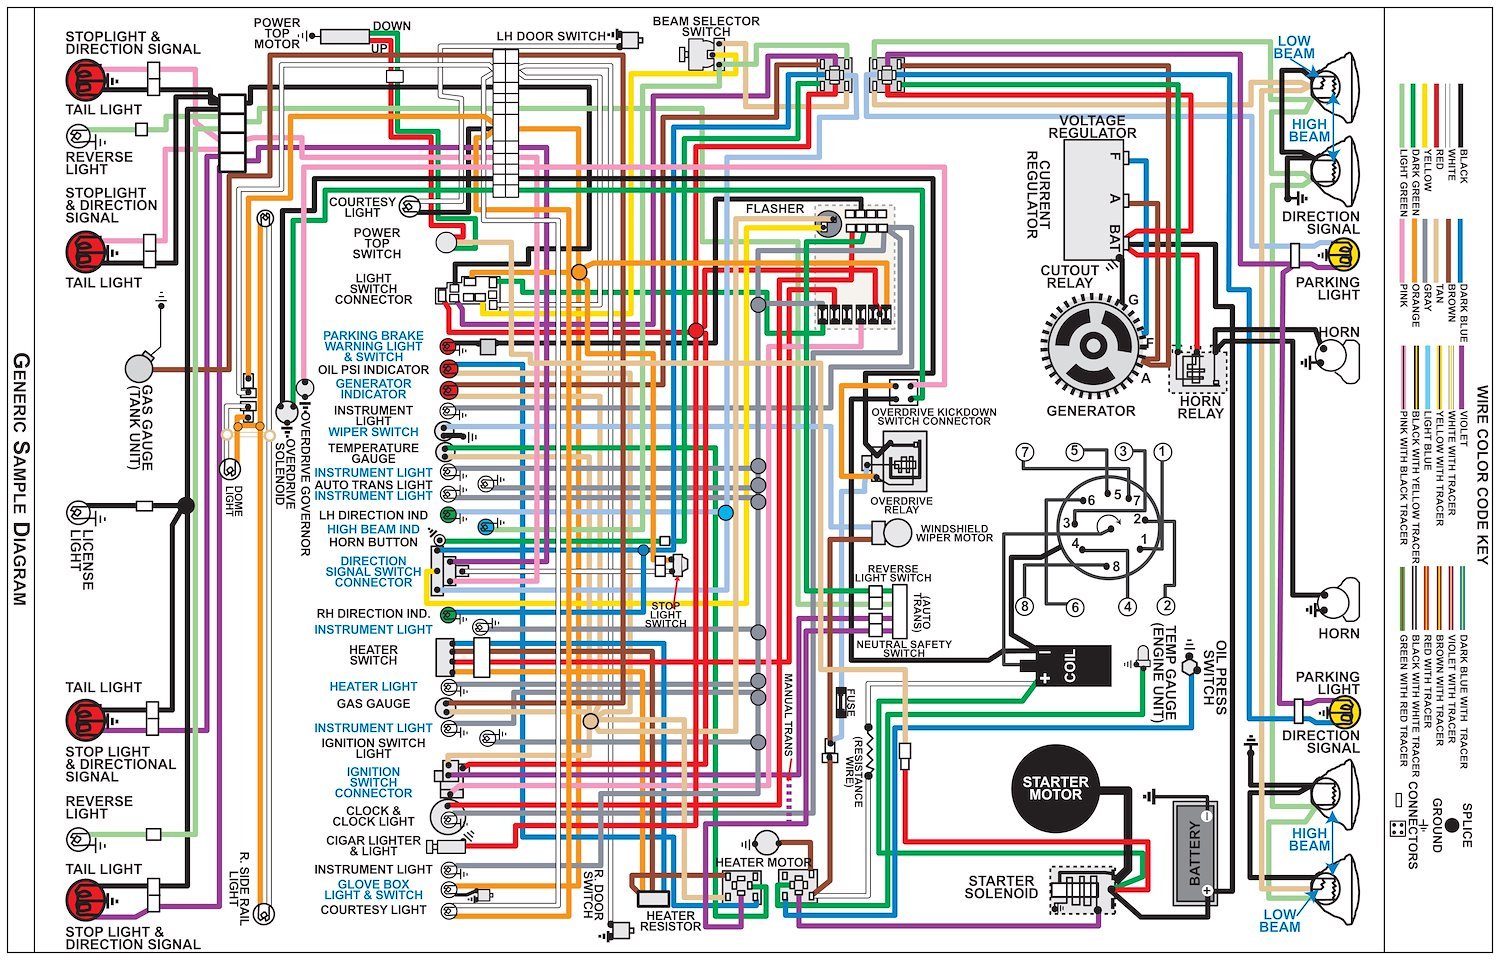 Wiring Diagram for 1963 Chevy Truck, 11 in. x 17 in., Laminated